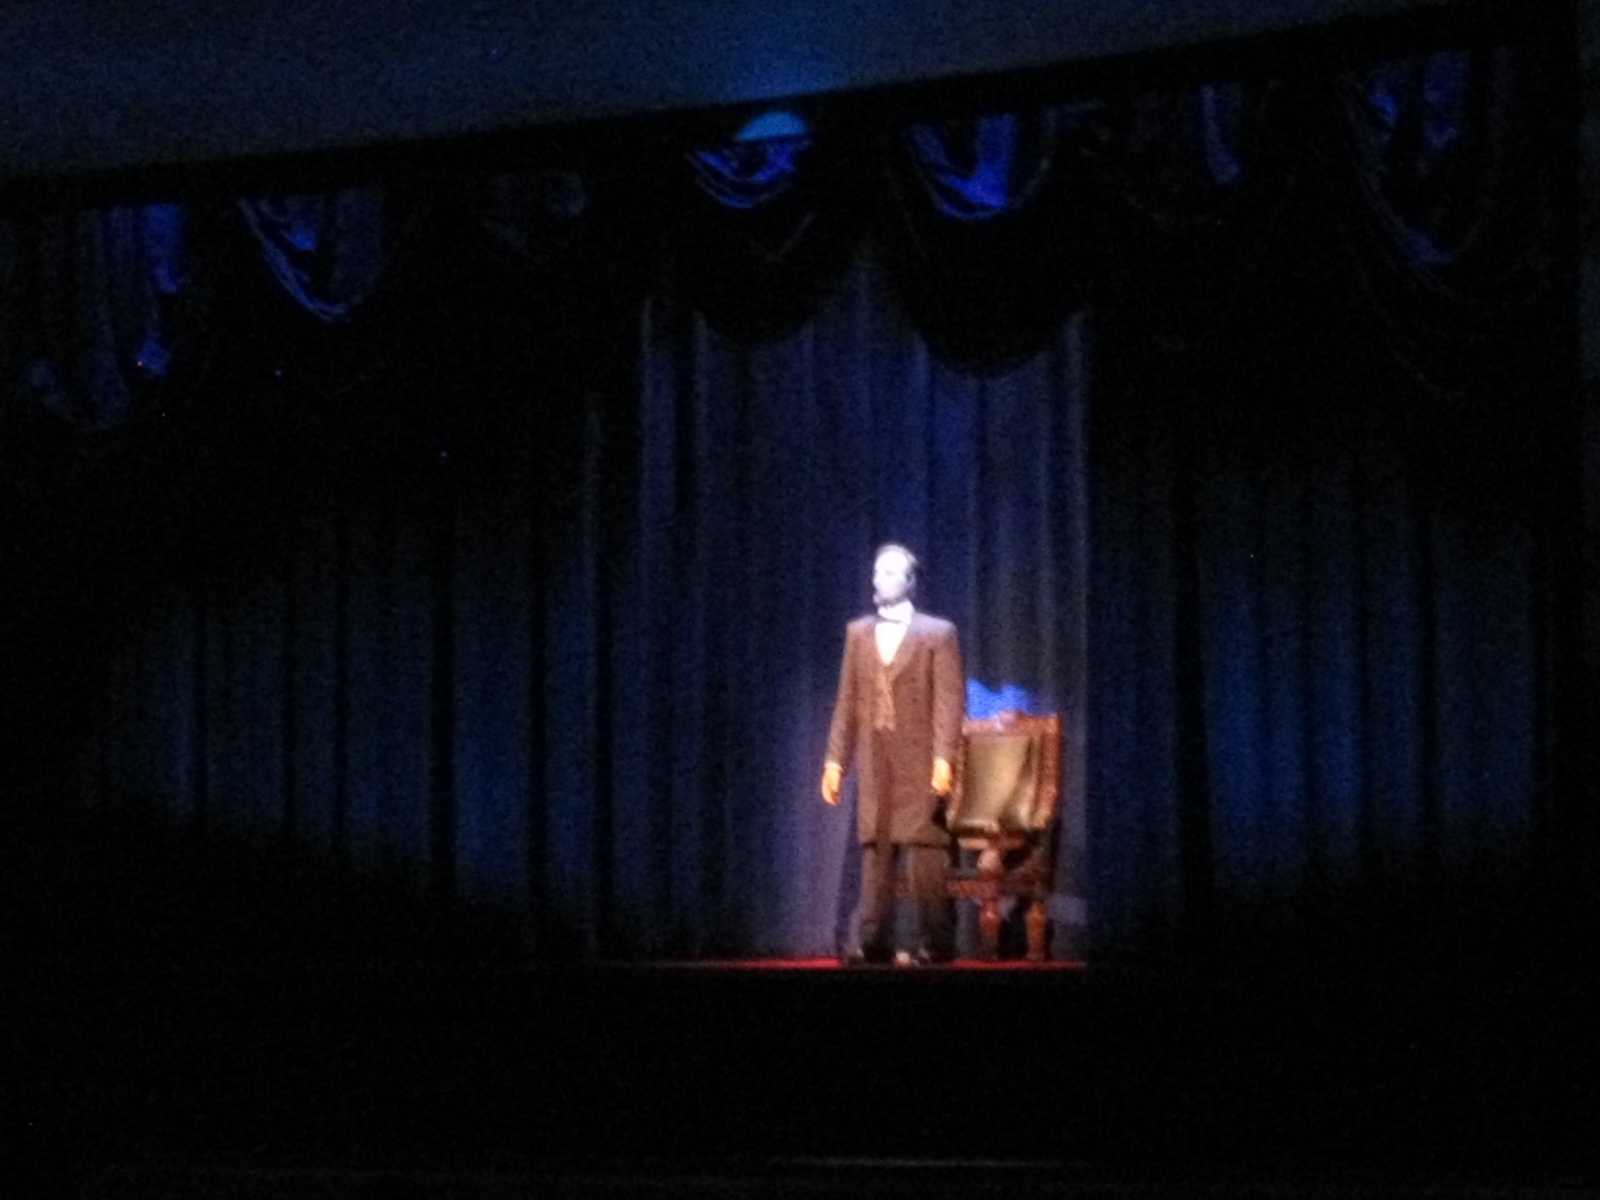 72 Hall of Presidents (2)